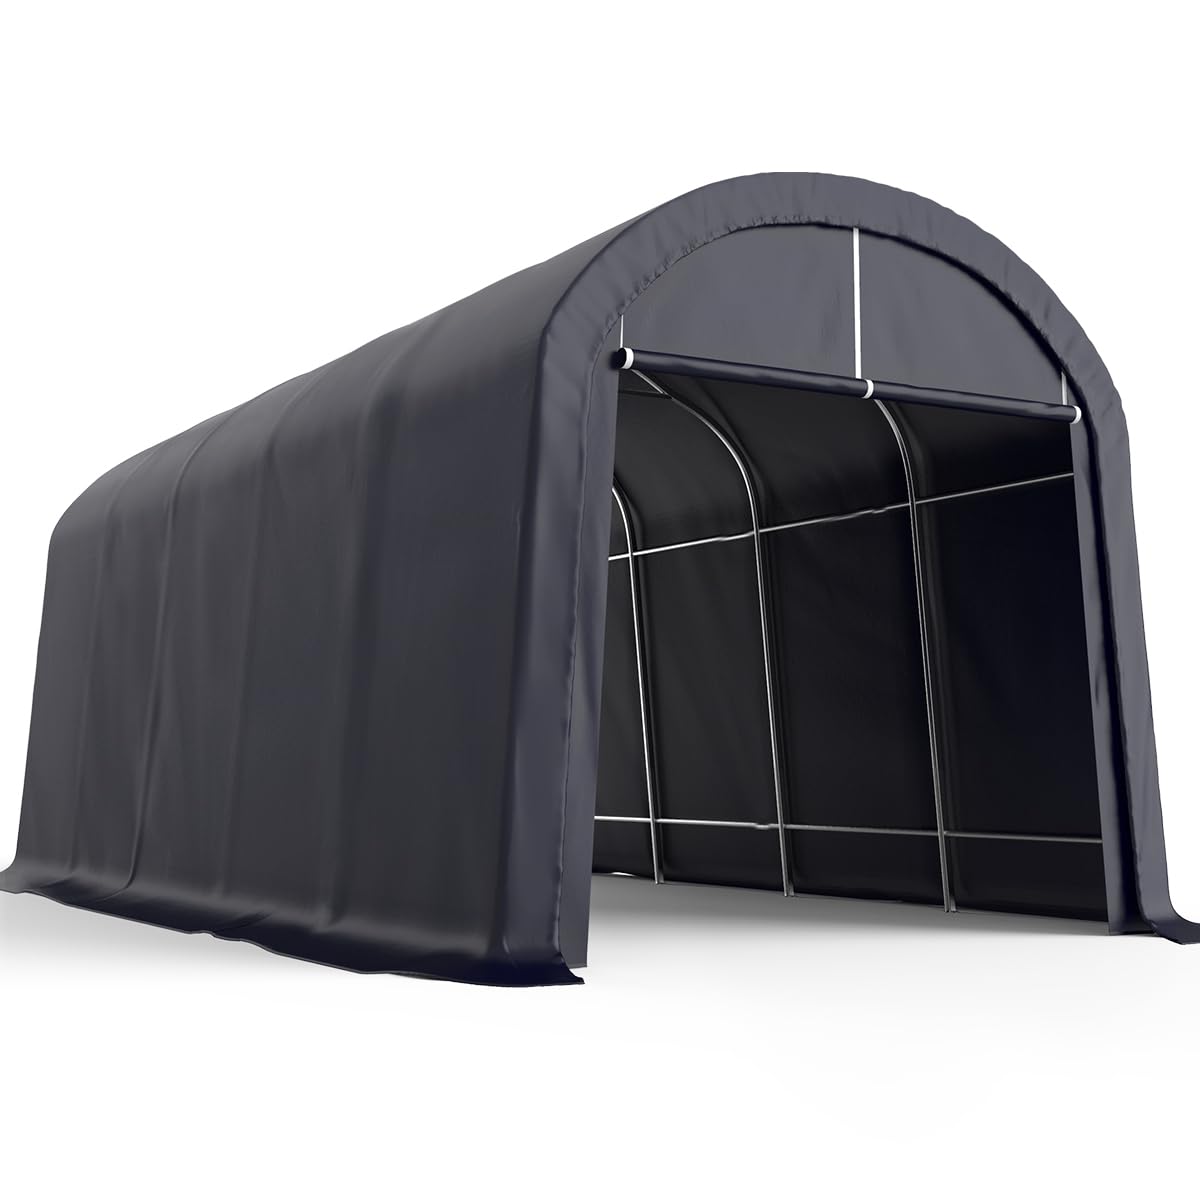 KING BIRD 12' x 20' Round Style Garage Shelter Anti-Snow Heavy Duty Storage Shelter Carport Portable Canopy Storage Shelter Shed for Boat, Patio Furniture and Lawn Mower-Dark Gray 12'X20' Dark Gray